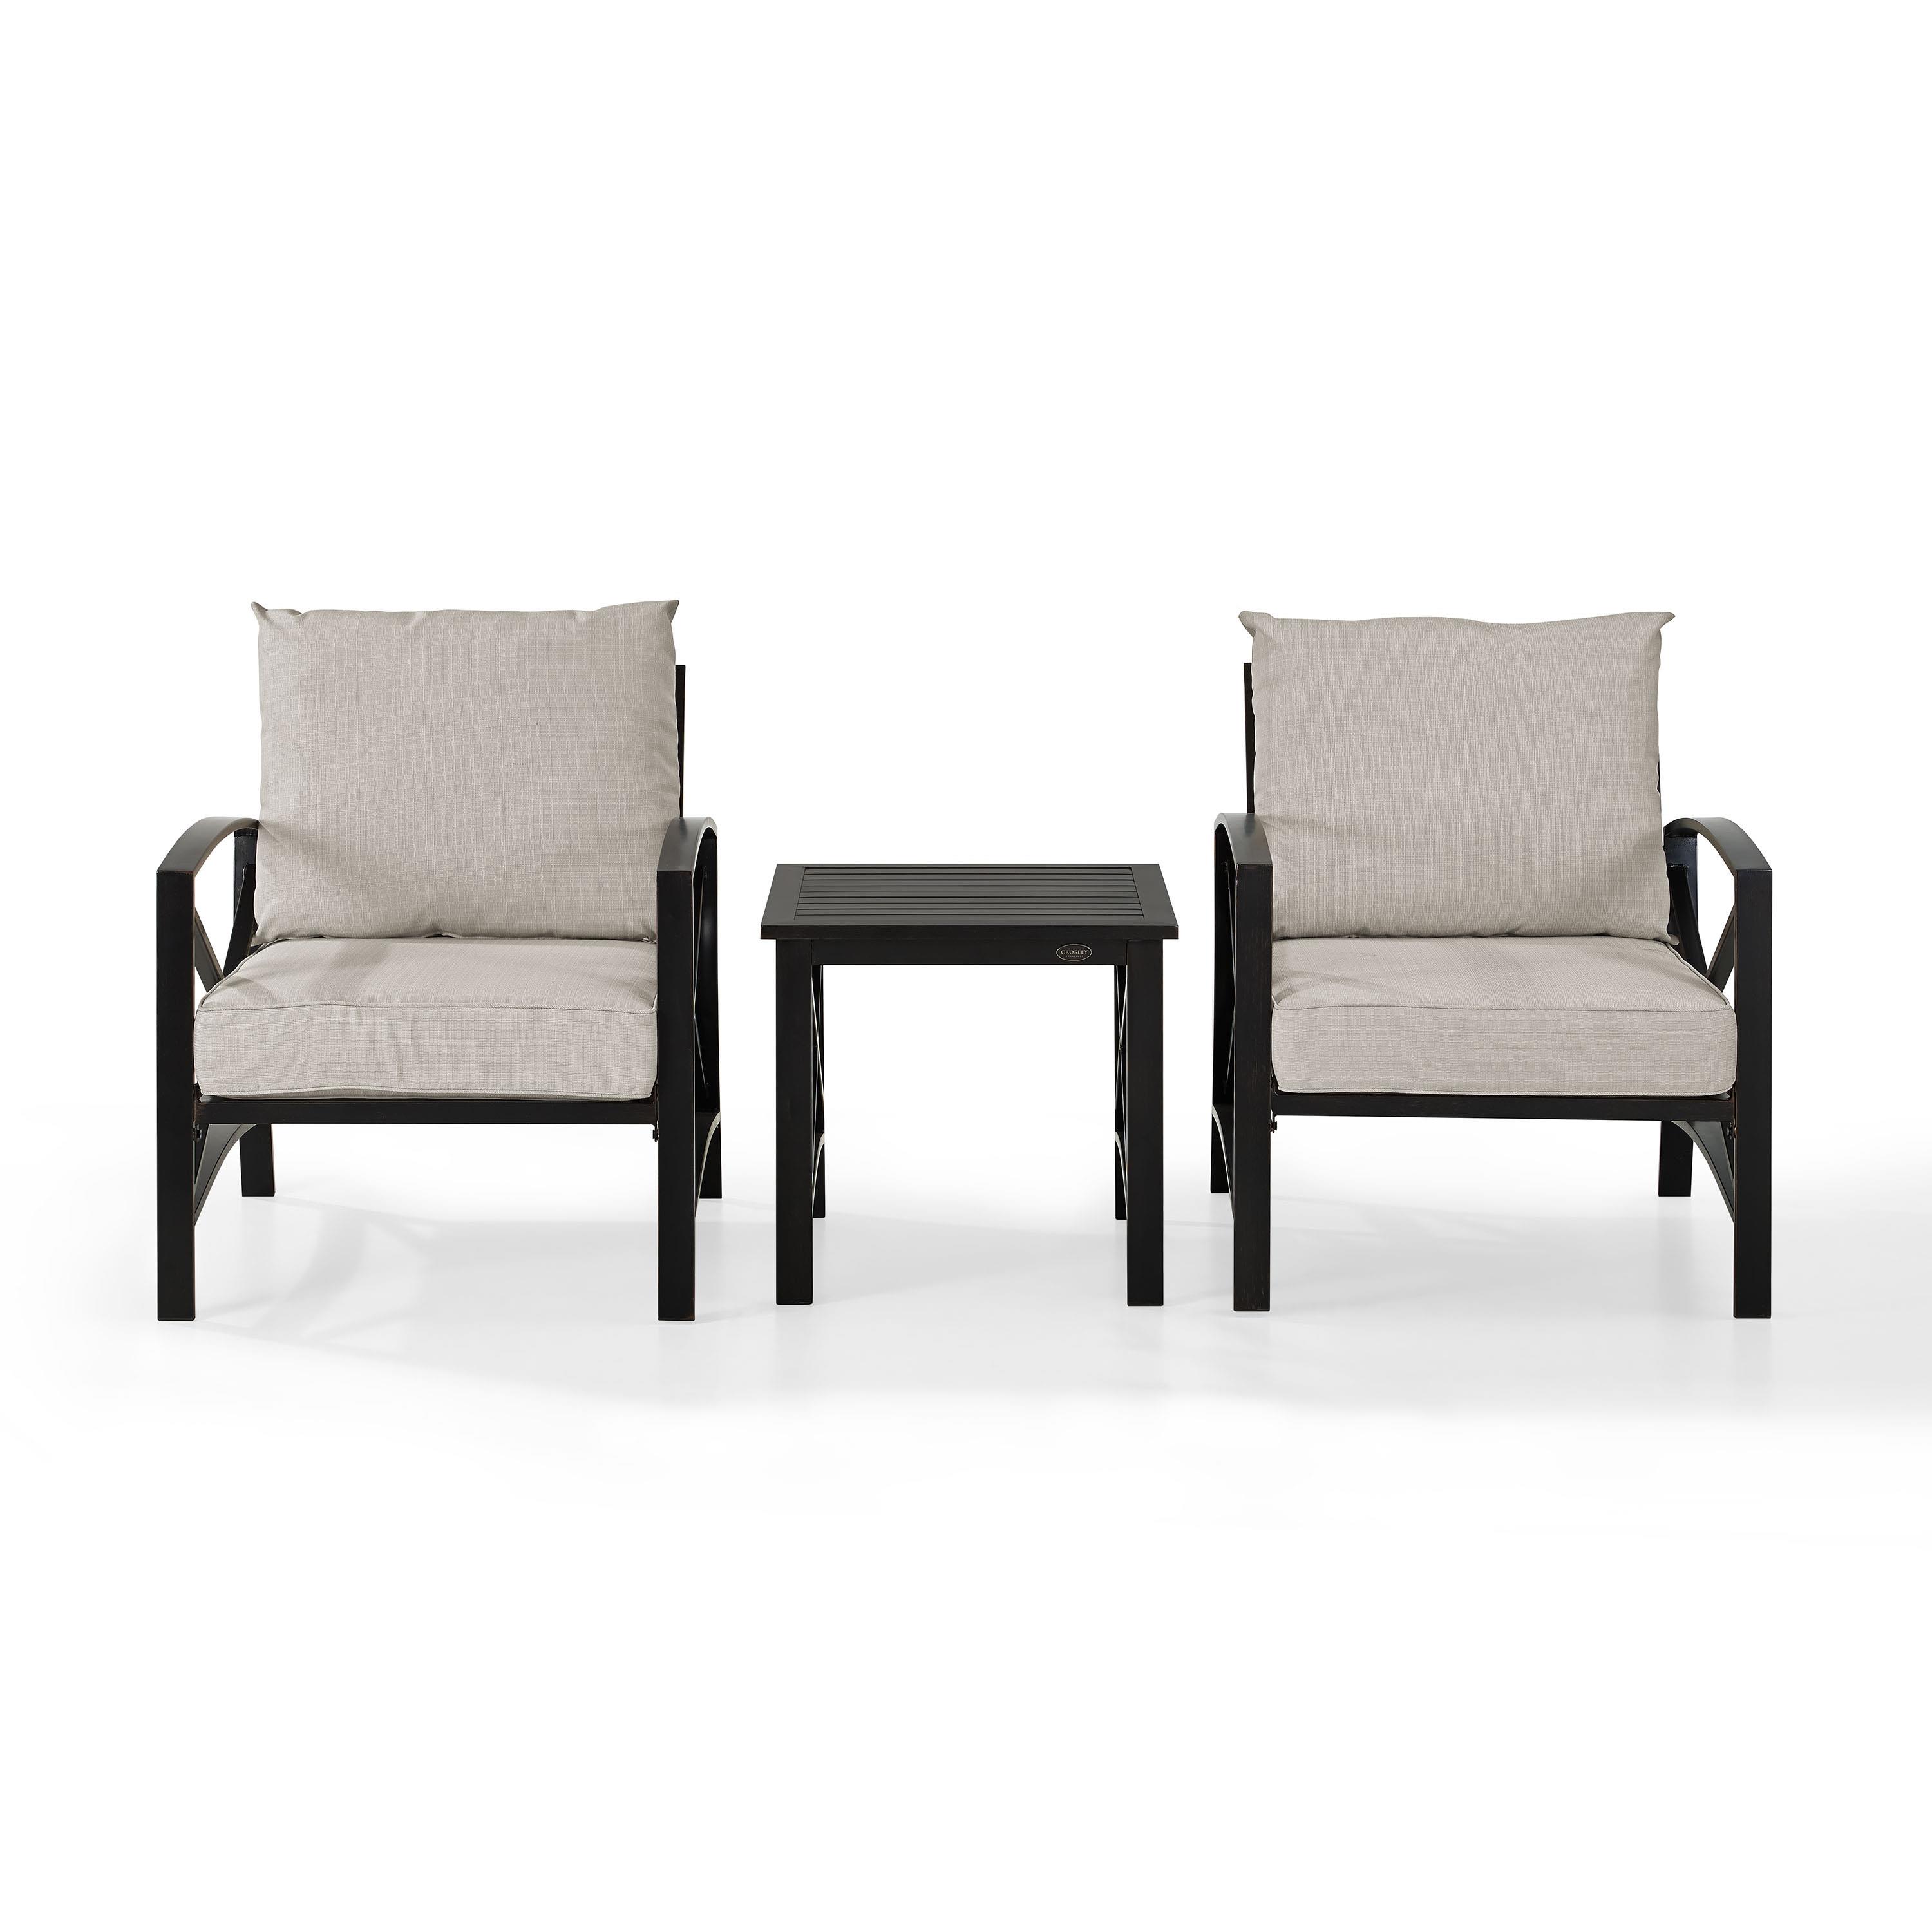 Crosley Furniture Kaplan 3 Pc Outdoor Seating Set With Oatmeal Cushion - Two Chairs, Side Table - image 5 of 8